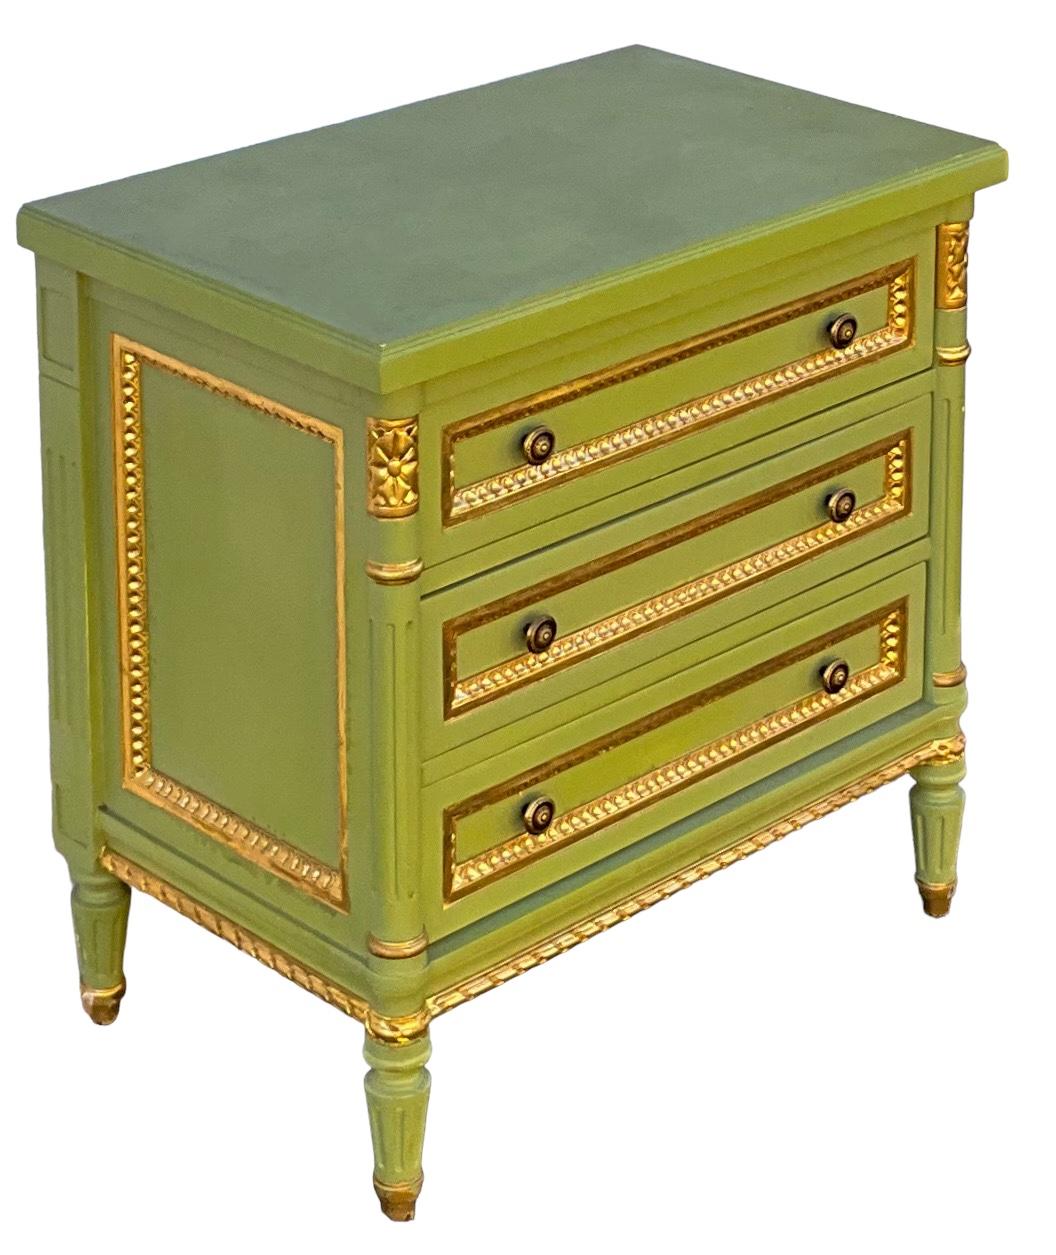 20th Century French Louis XVI Style Painted Chests / Commodes / Tables Att. To Julia Gray For Sale